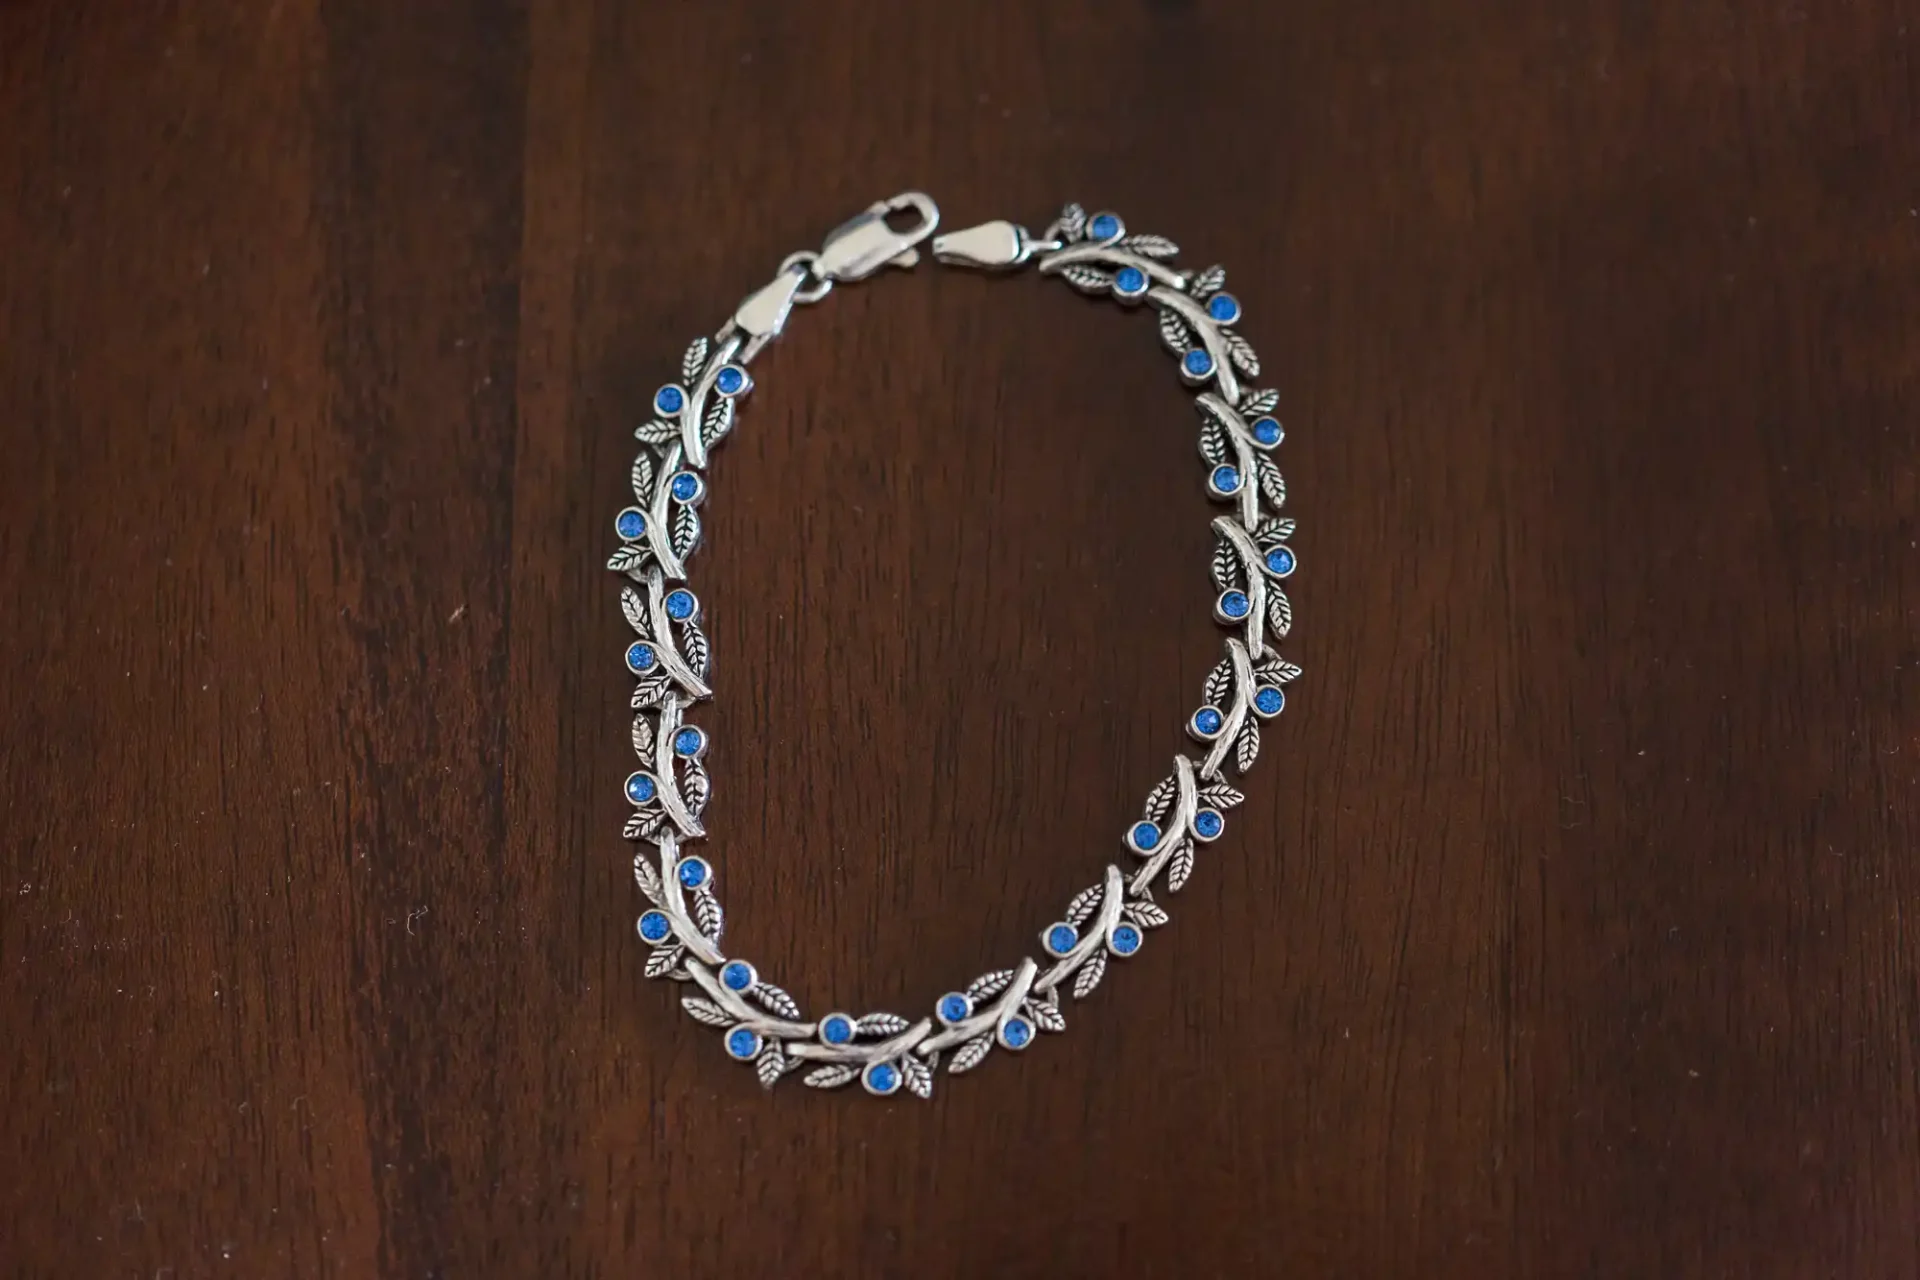 A silver bracelet with blue and white gemstones, laid in a circular shape on a dark wooden surface.